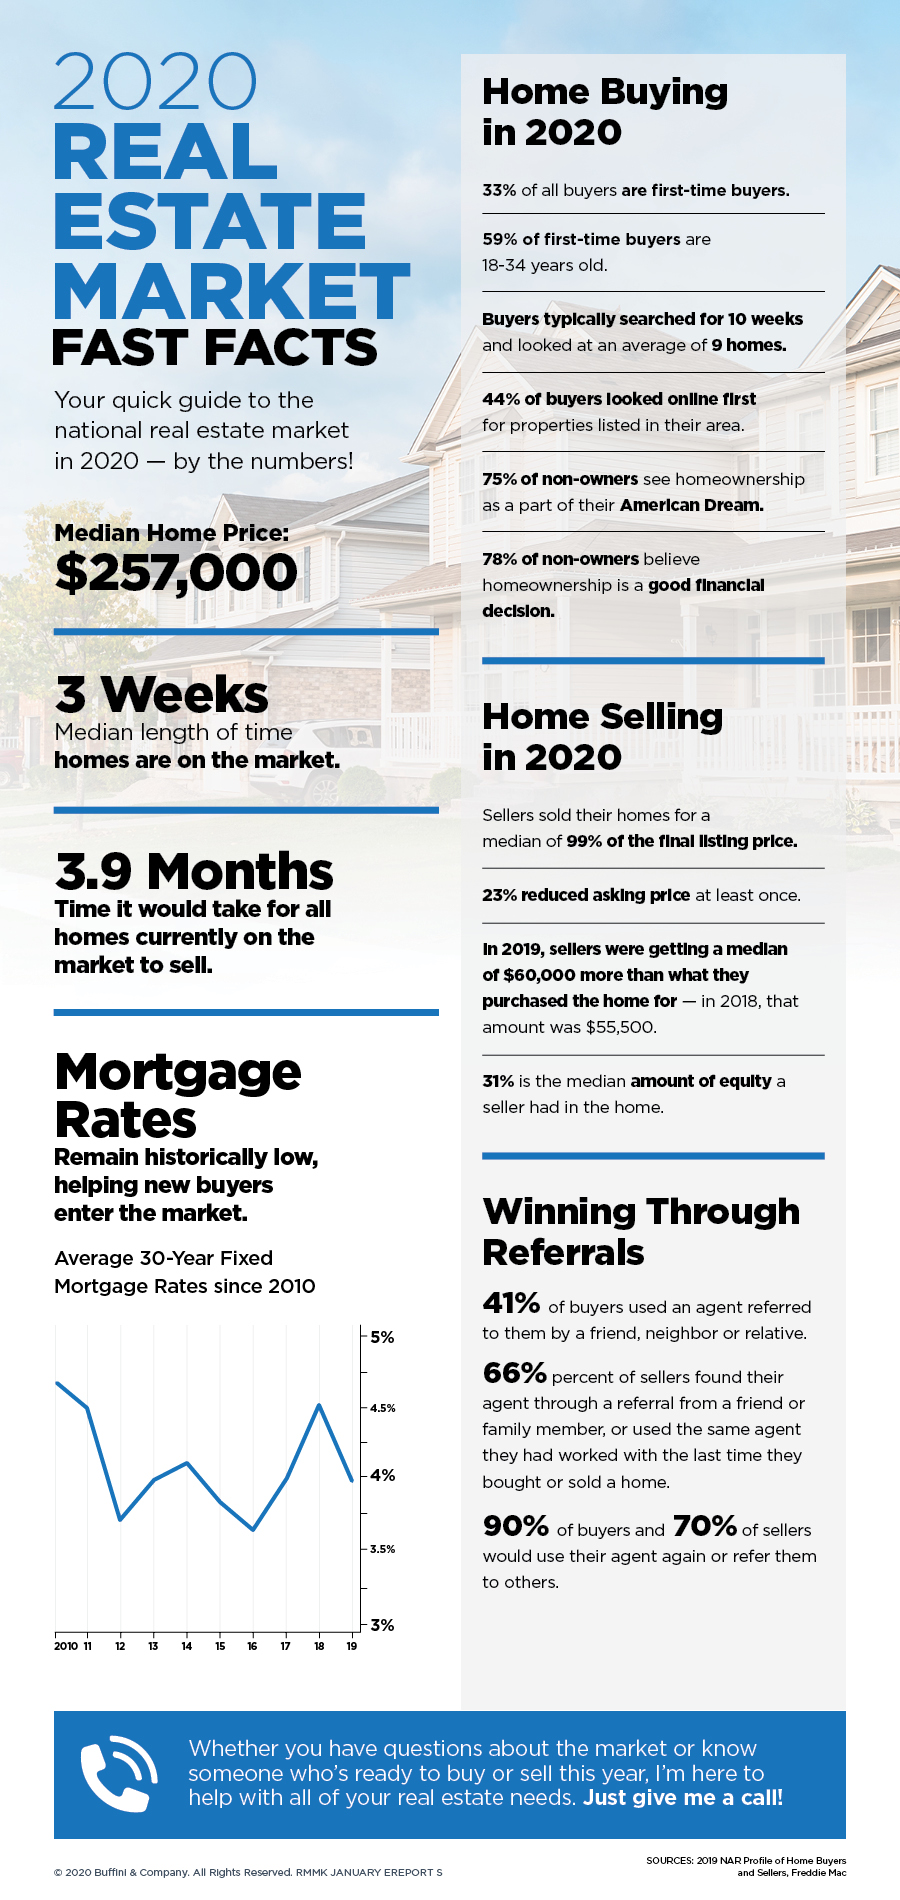 The 2020 real estate market fast facts